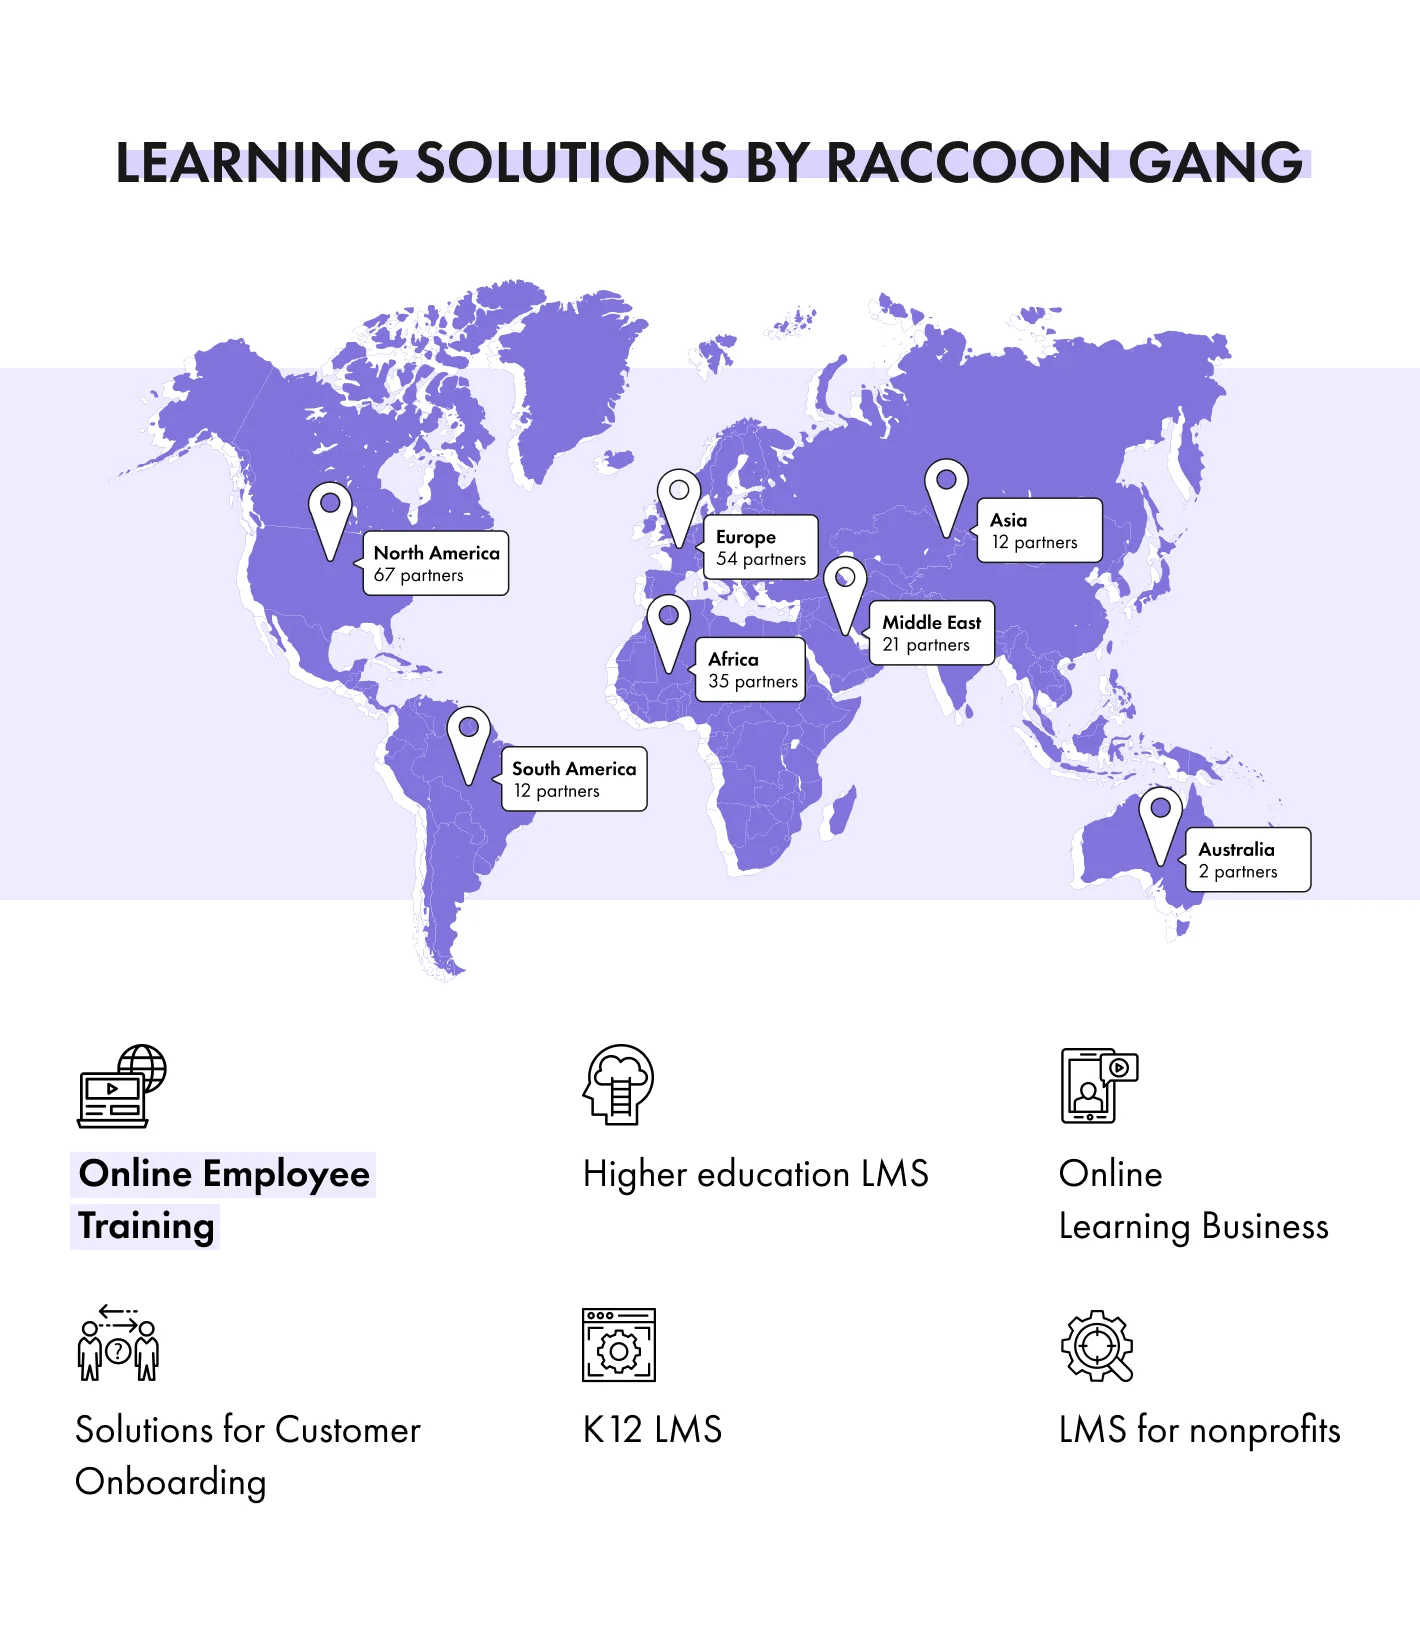 Raccoon Gang is a leading provider of LMS